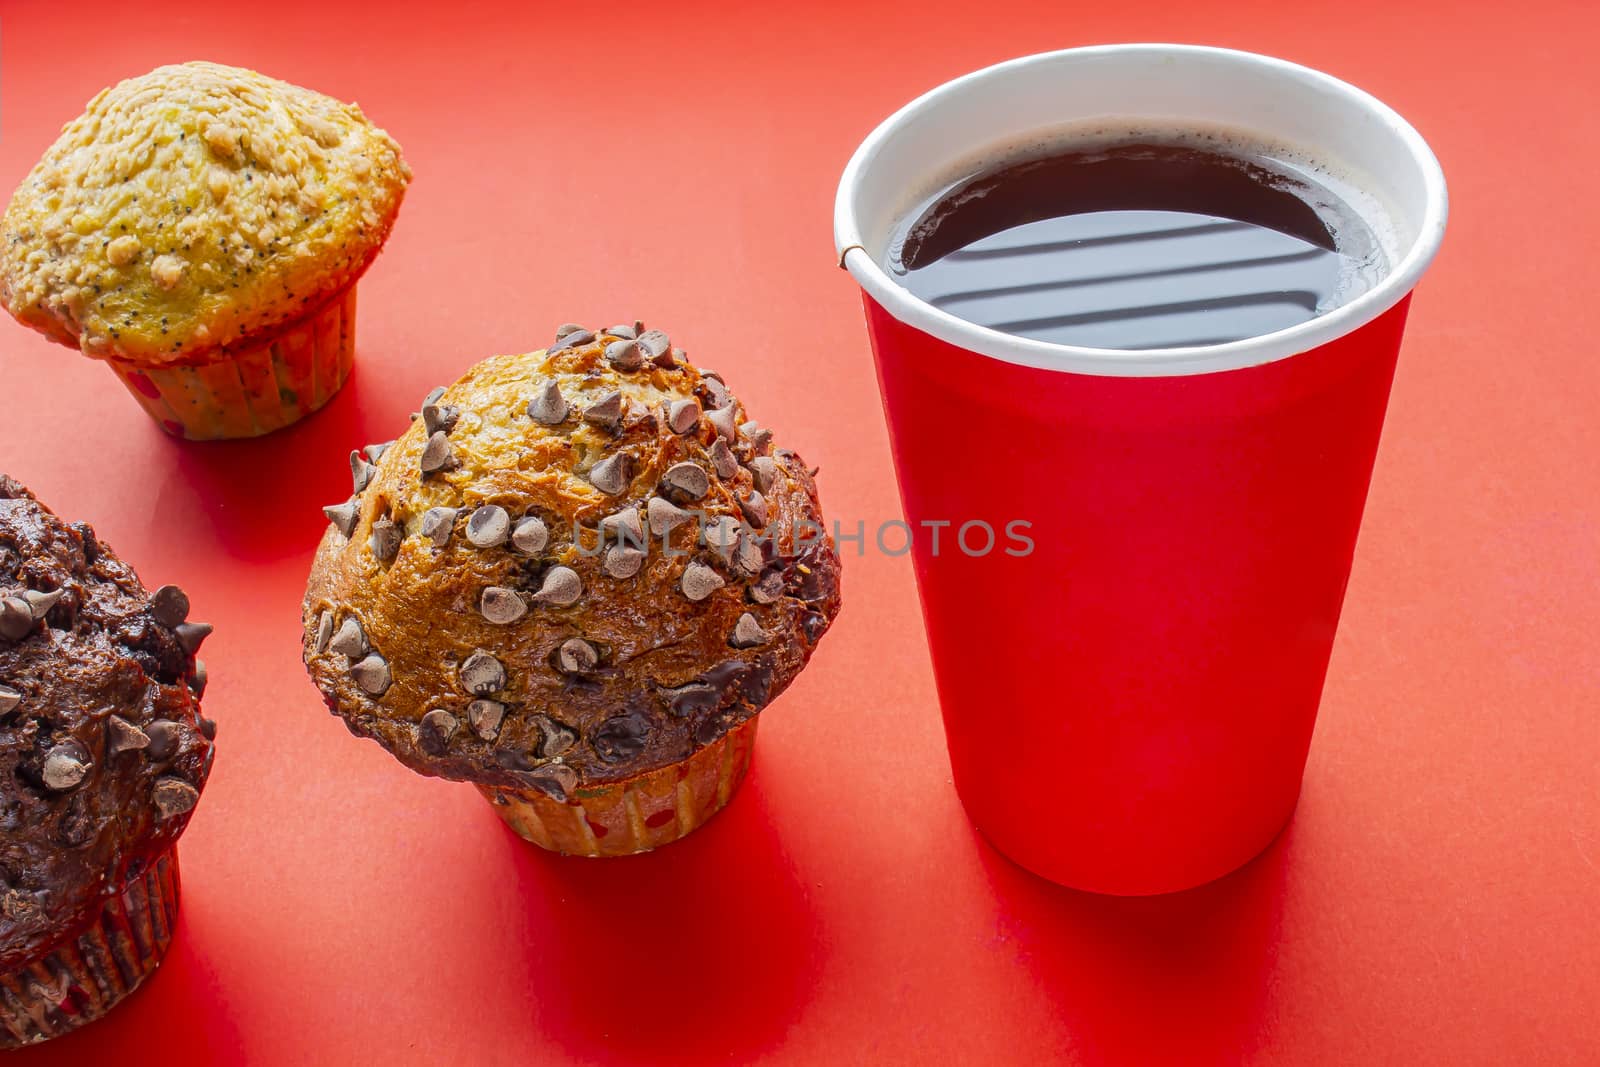 Single-use coffee Cup and muffin on red background by oasisamuel